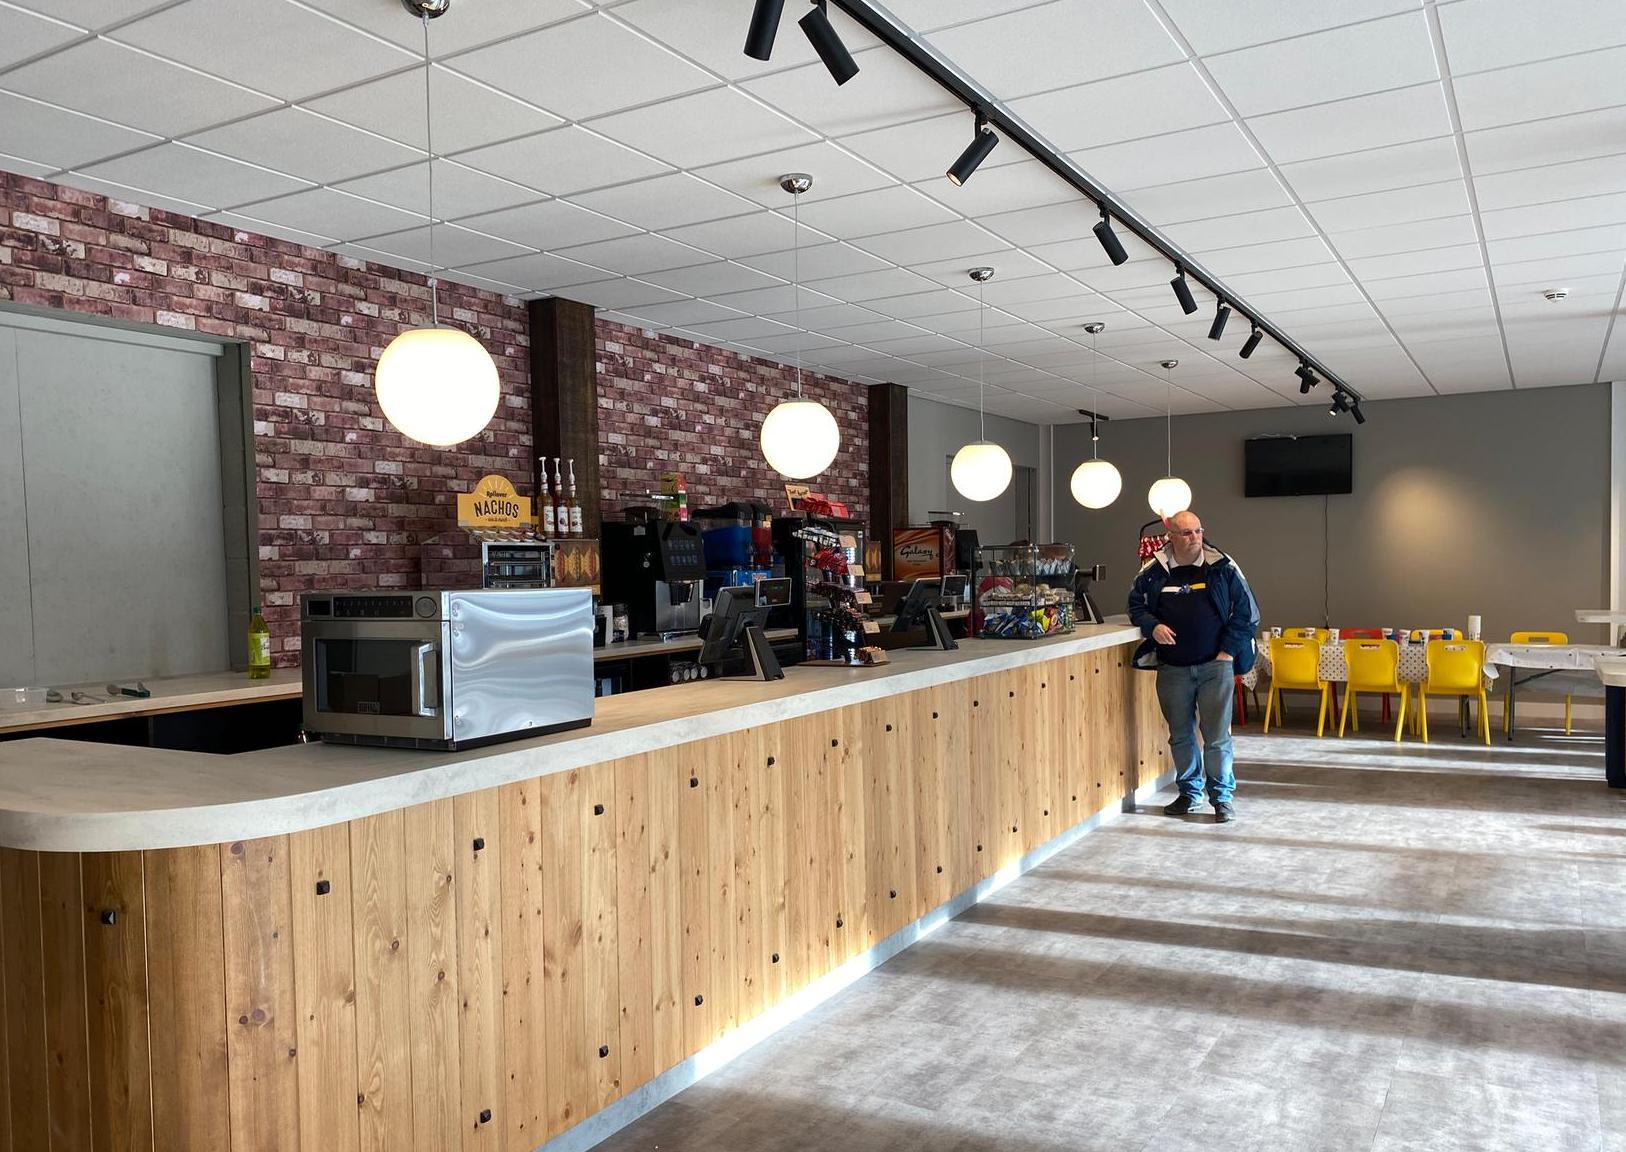 A large bar and refreshment area is also being built above the venue